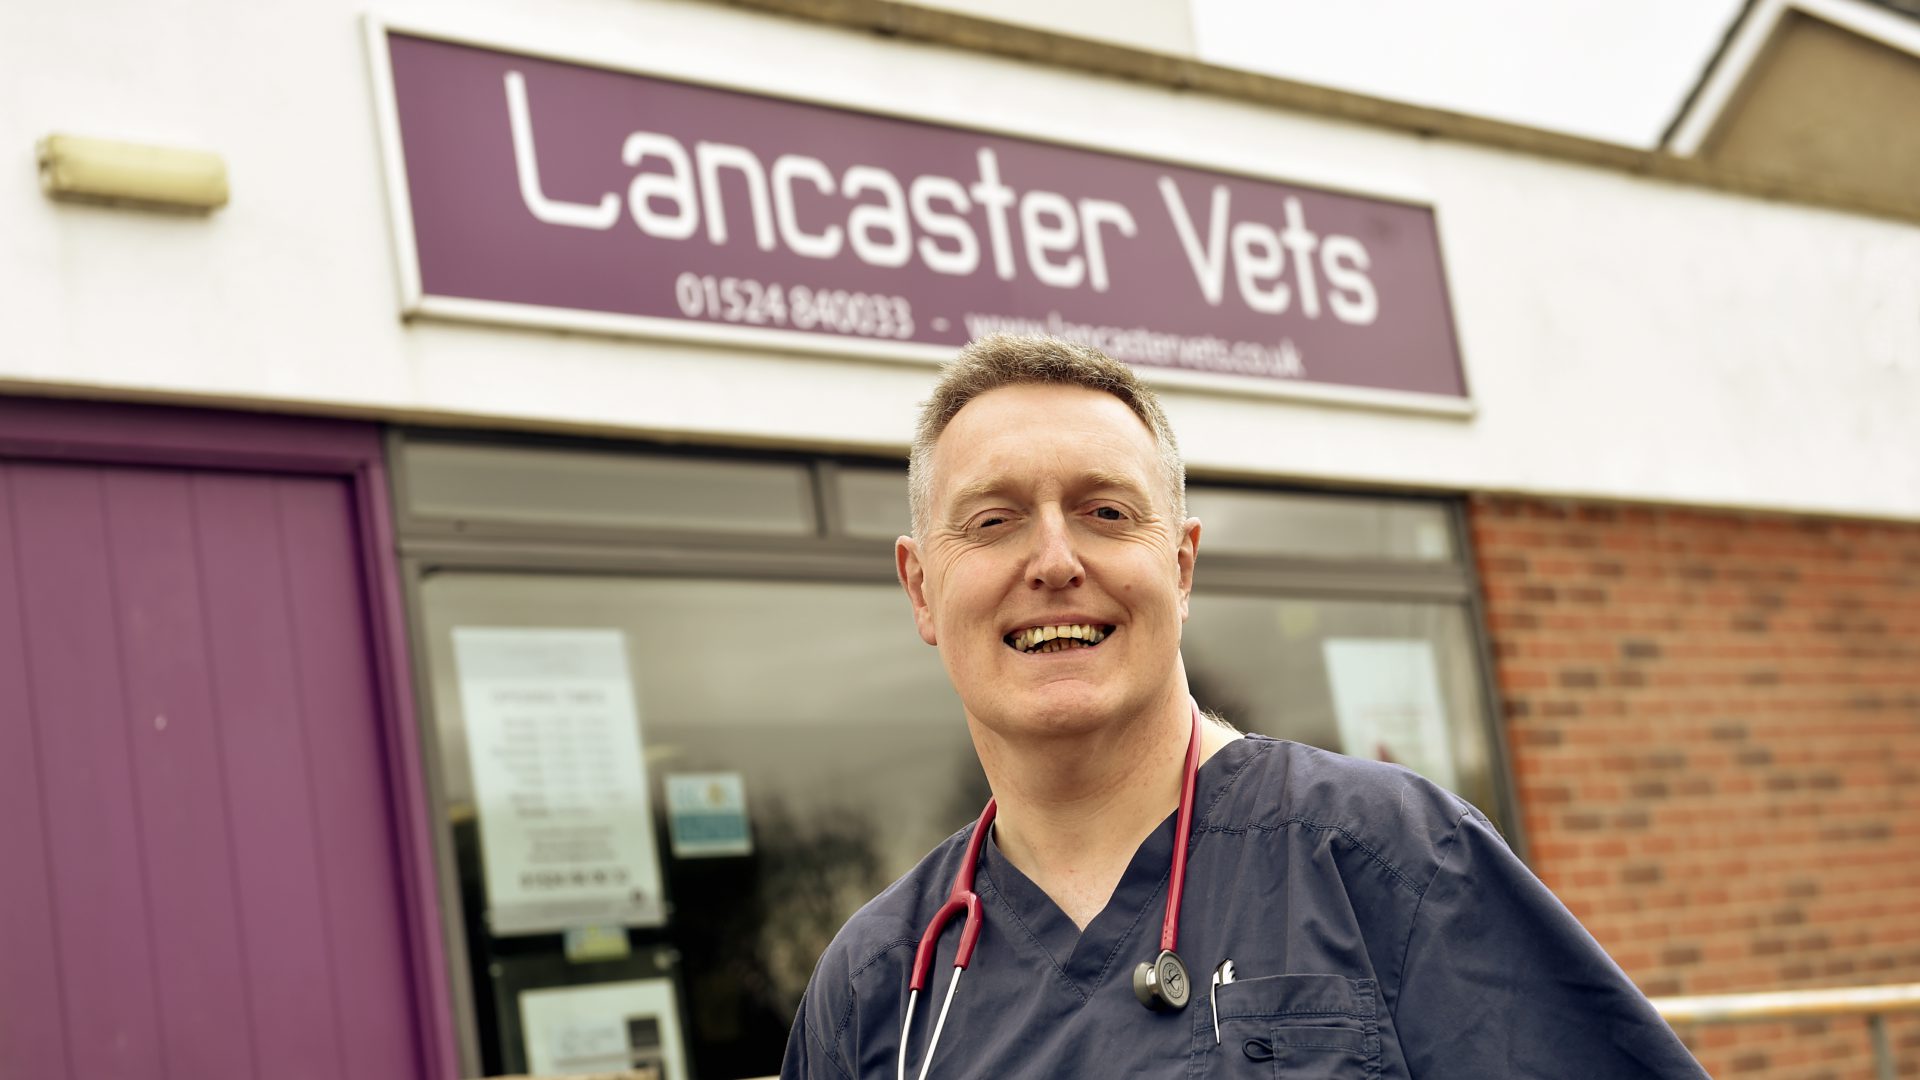 Vet helping to end mental health stigma as he talks about his own battle